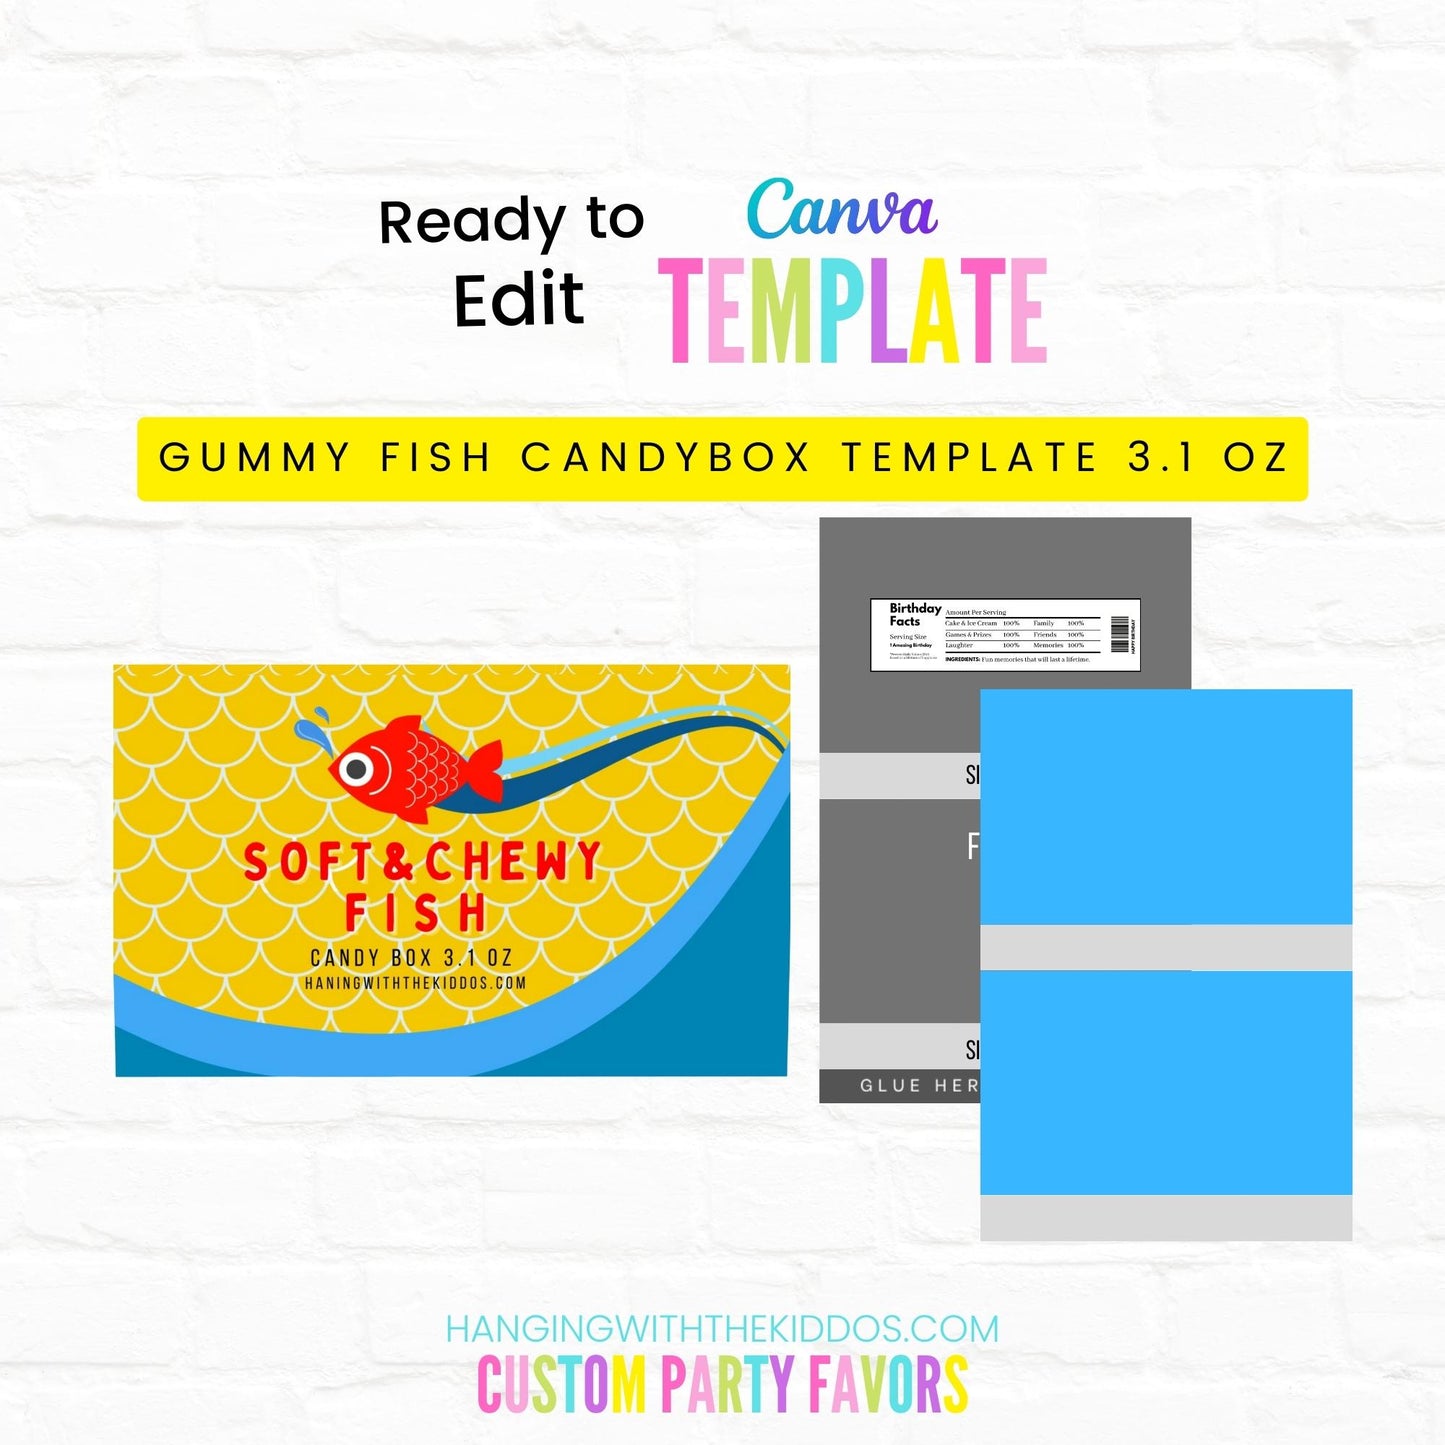 GUMMY FISH Candy Box Template